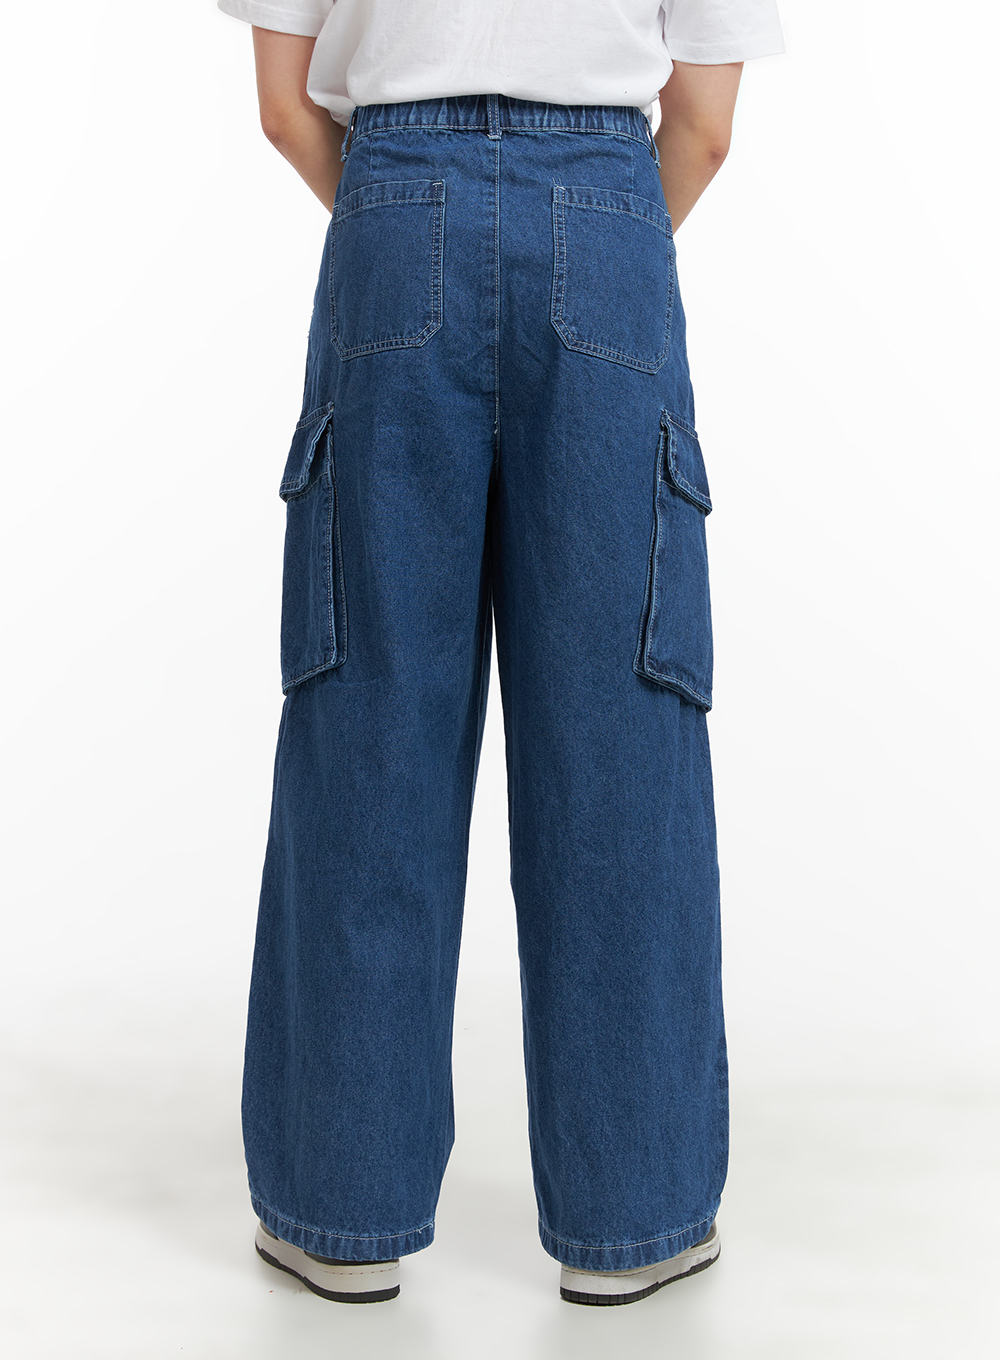 mens-wide-fit-cargo-jeans-ia402